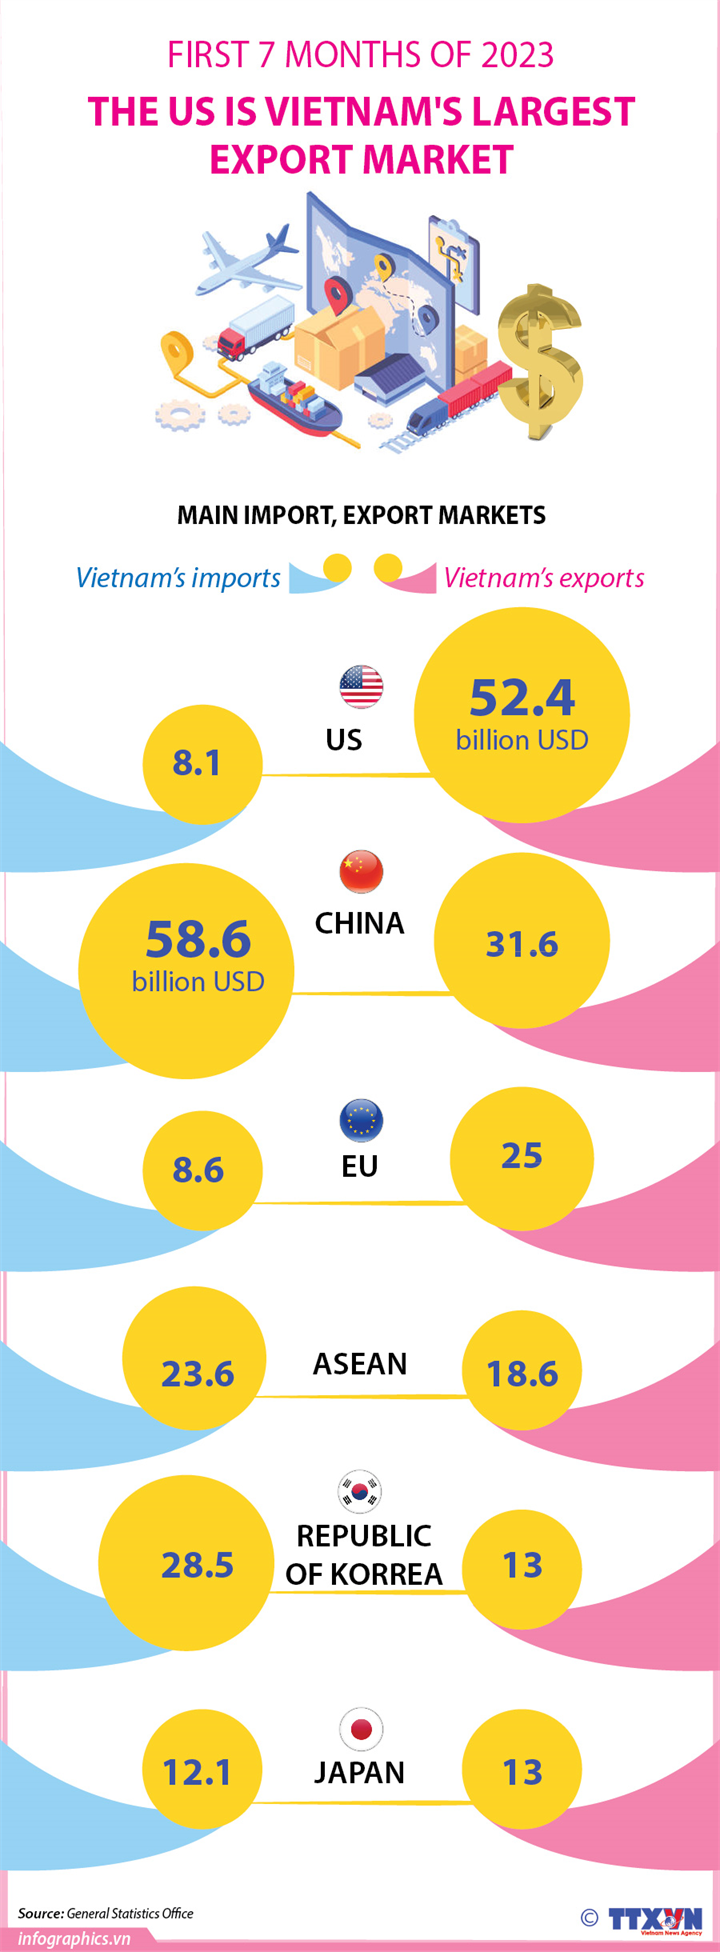 First 7 months of 2023: The US remains Vietnam's largest export market